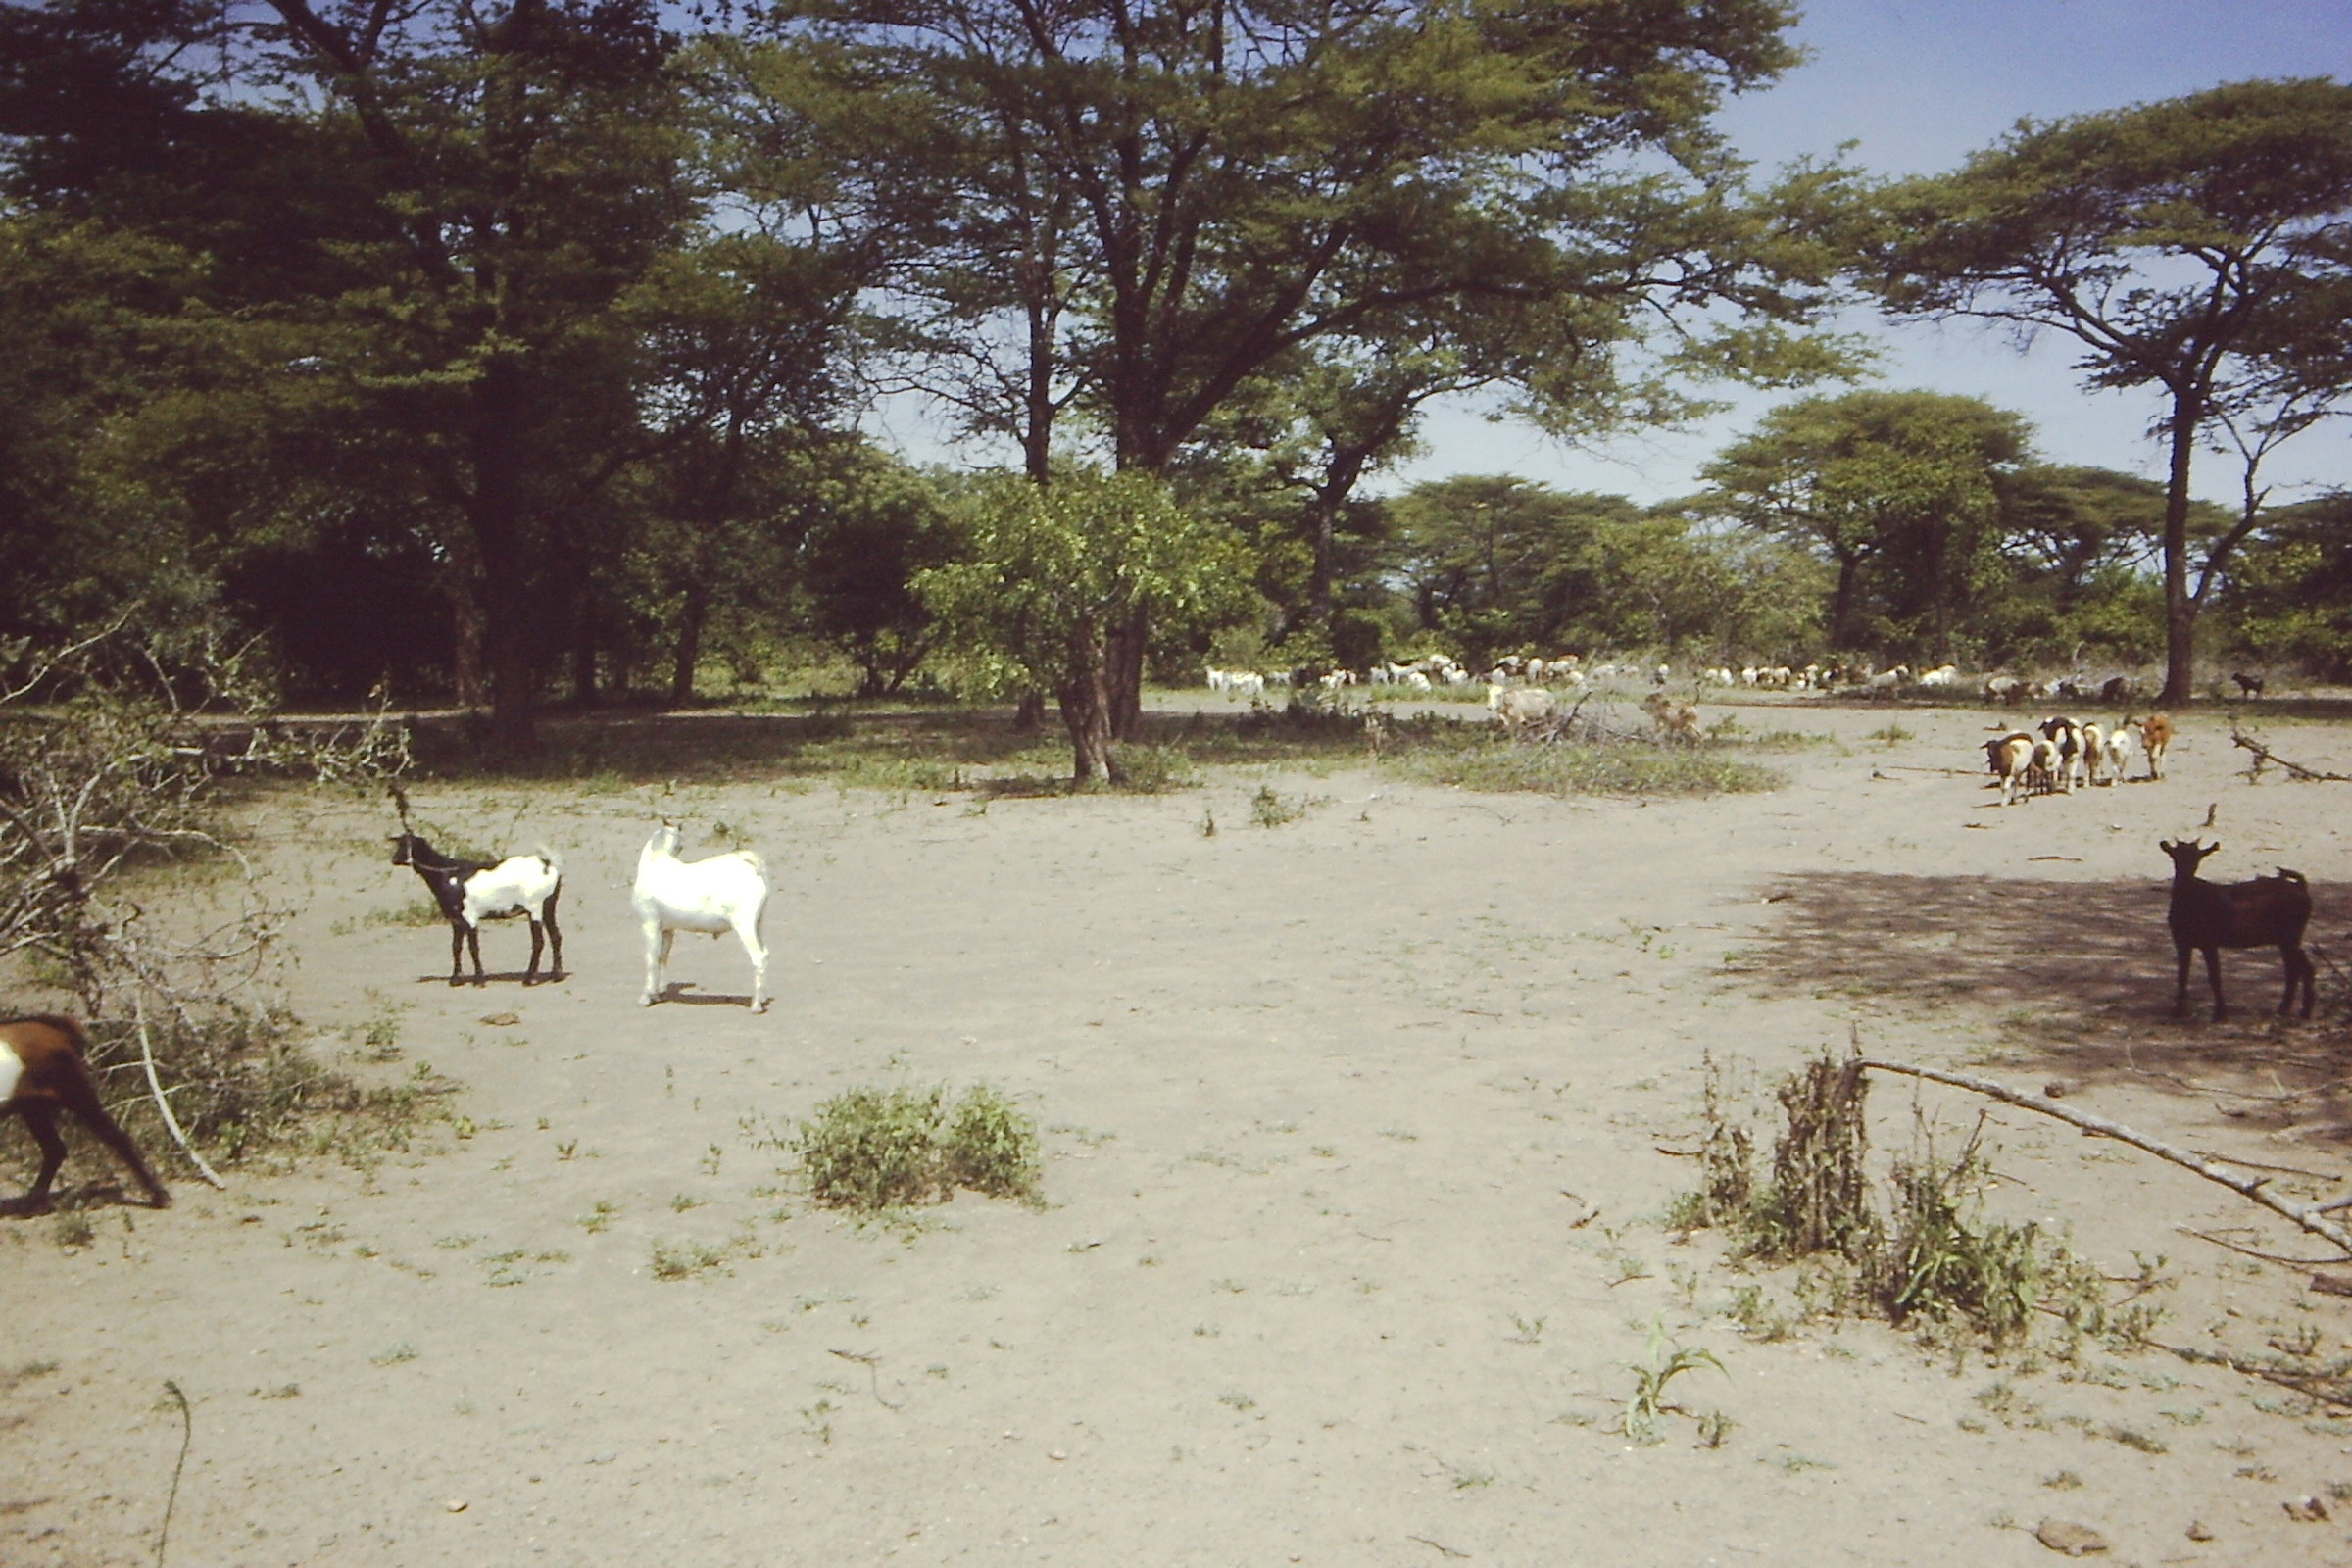 A mostly sandy, barren landscape with a few goats and trees